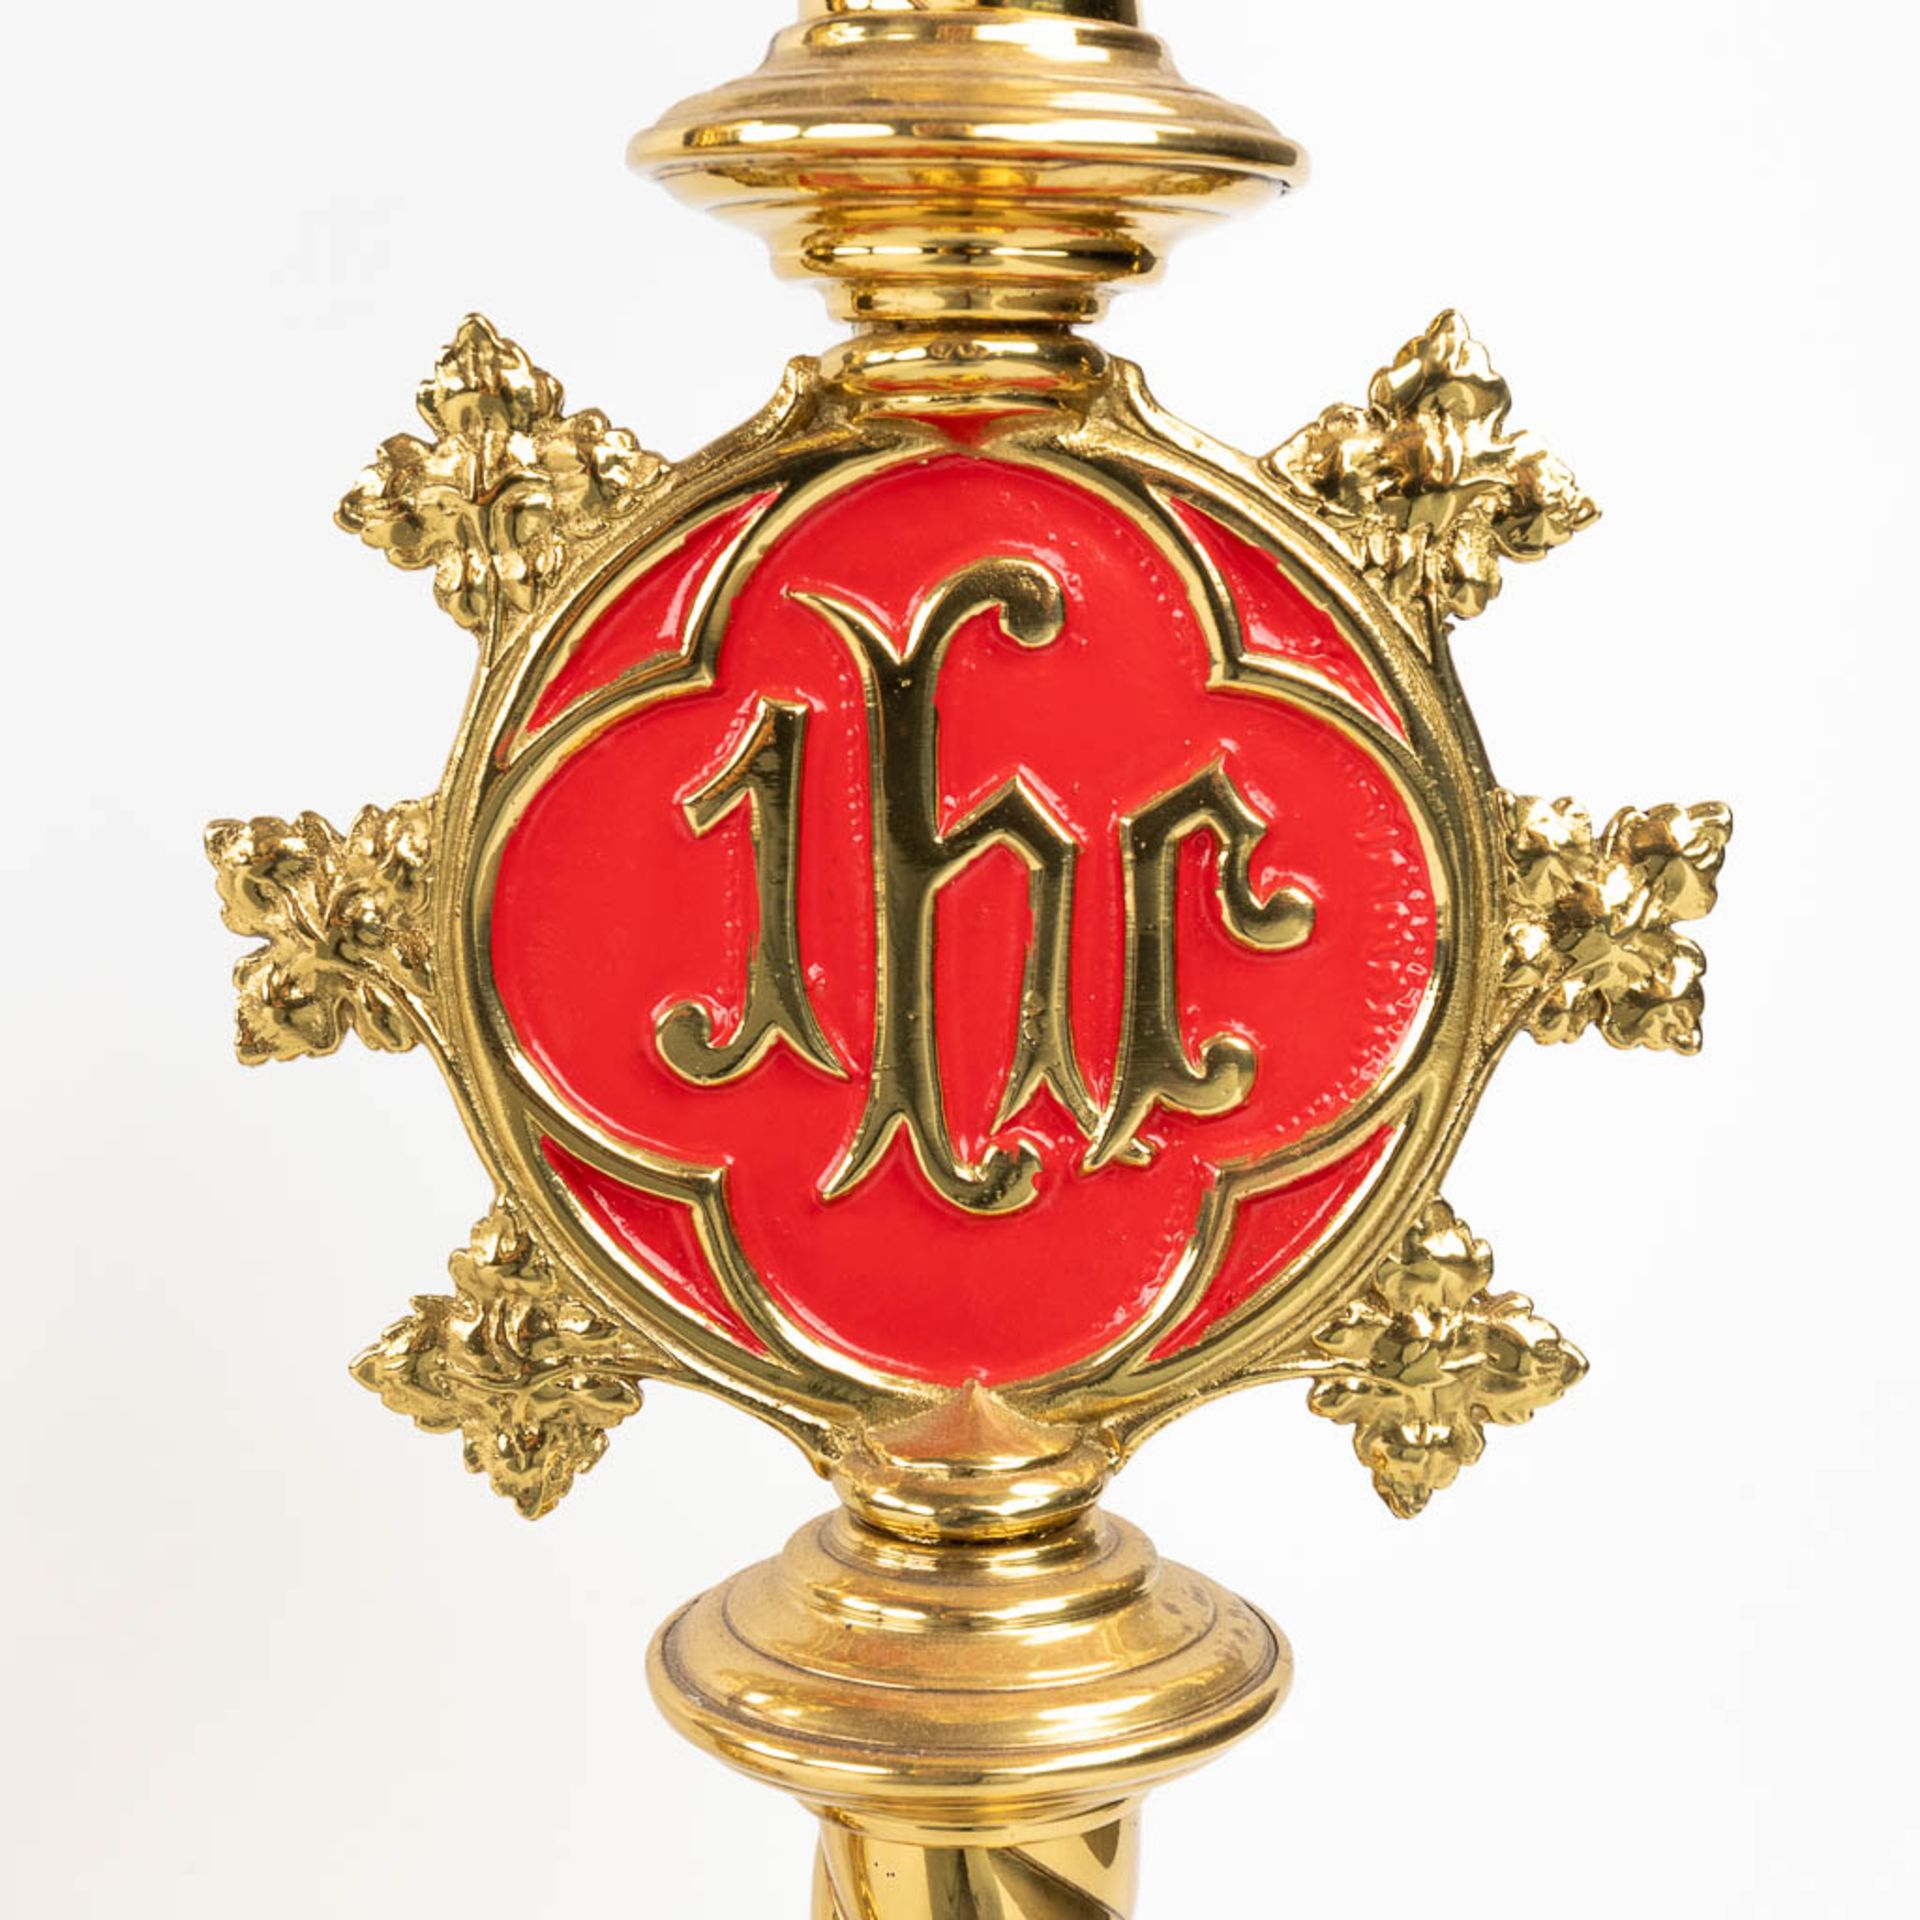 A set of 6 Church candlesticks with red IHS logo. (H:72 x D:20 cm) - Image 9 of 13